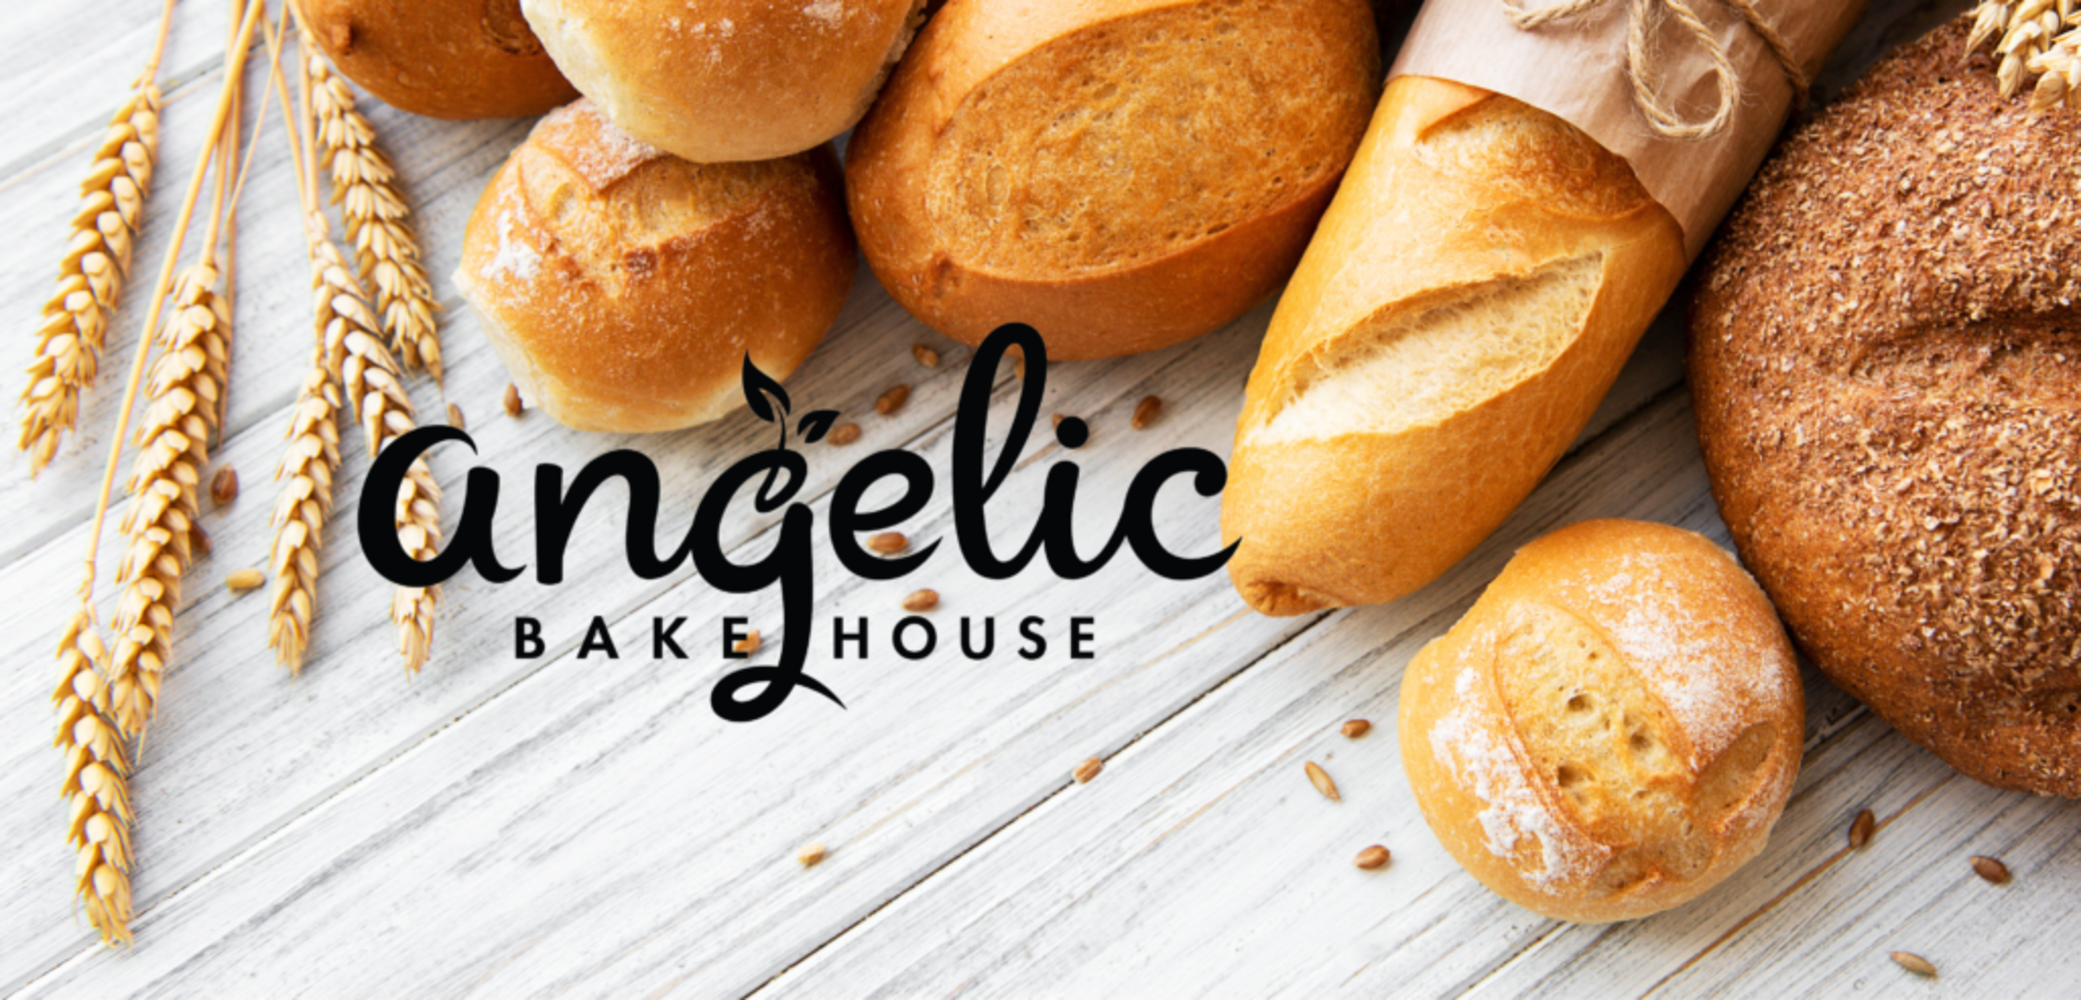 Angelic Bakehouse: NEW CLOSING 8/6 Tortilla, Flatbread, Bun Plant: 2018 W&P, Apache & Superior, Rack Ovens, Mixers, Stackers, Packaging